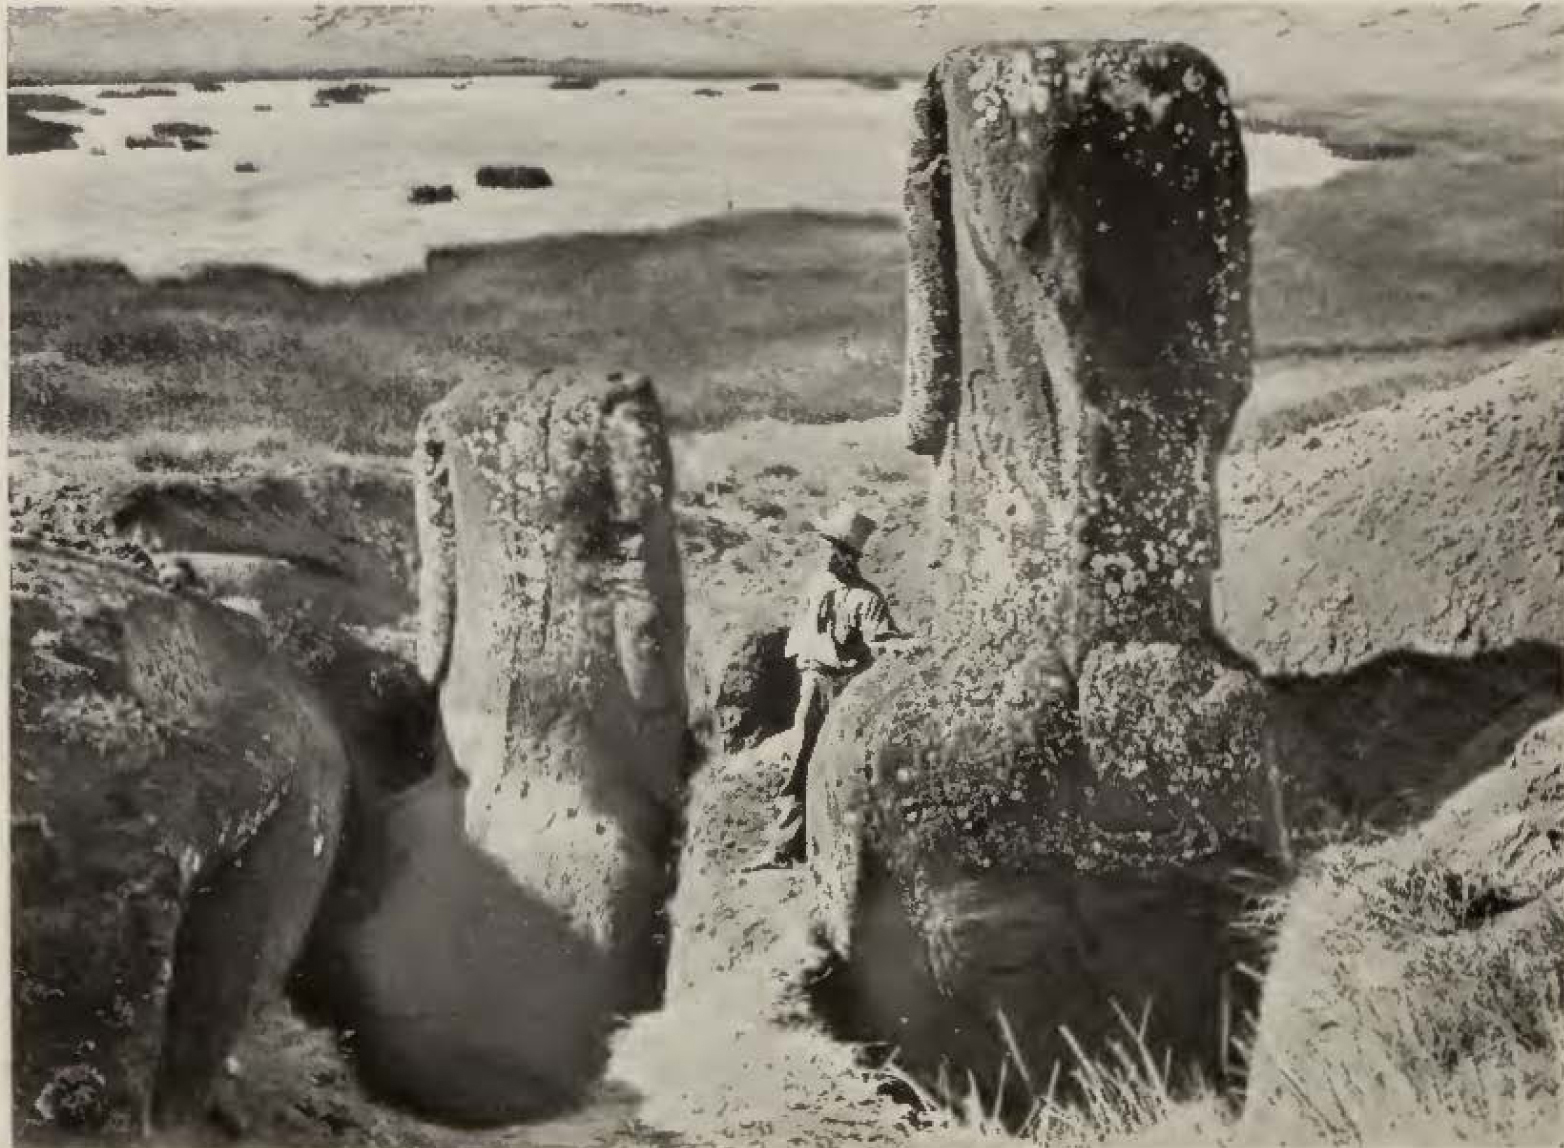 back view of two stone statues in a field